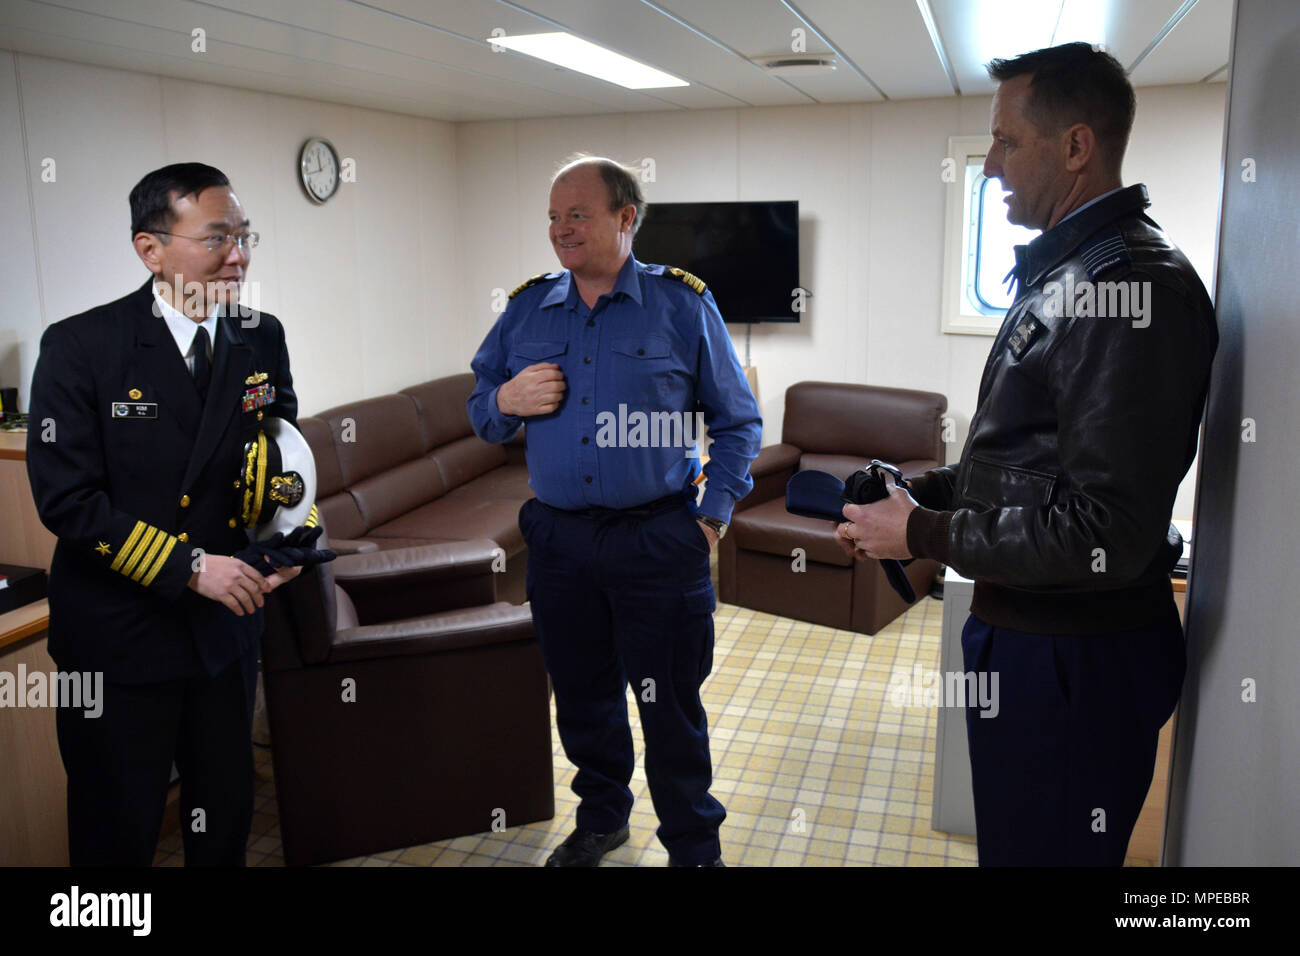 YOKOSUKA, Japan (Feb. 11, 2017) – Capt. Jeffrey Kim (left), Commander, Fleet Activities Yokosuka (CFAY) and Capt. Michael Jansen (right), Commander United Nations Command (Rear) welcome Capt. Shaun Jones (middle) from Royal Fleet Auxiliary (RFA) Tidespring (A136) to Fleet Activities (FLEACT) Yokosuka. RFA Tidespring is the first Tide-class tanker the Royal Navy has taken delivery of from South Korean shipbuilding company Daewoo Shipbuilding & Marine Engineering (DSME). Tidespring’s port call to FLEACT Yokosuka was a scheduled visit sponsored by the United Nations Command (Rear). FLEACT provide Stock Photo